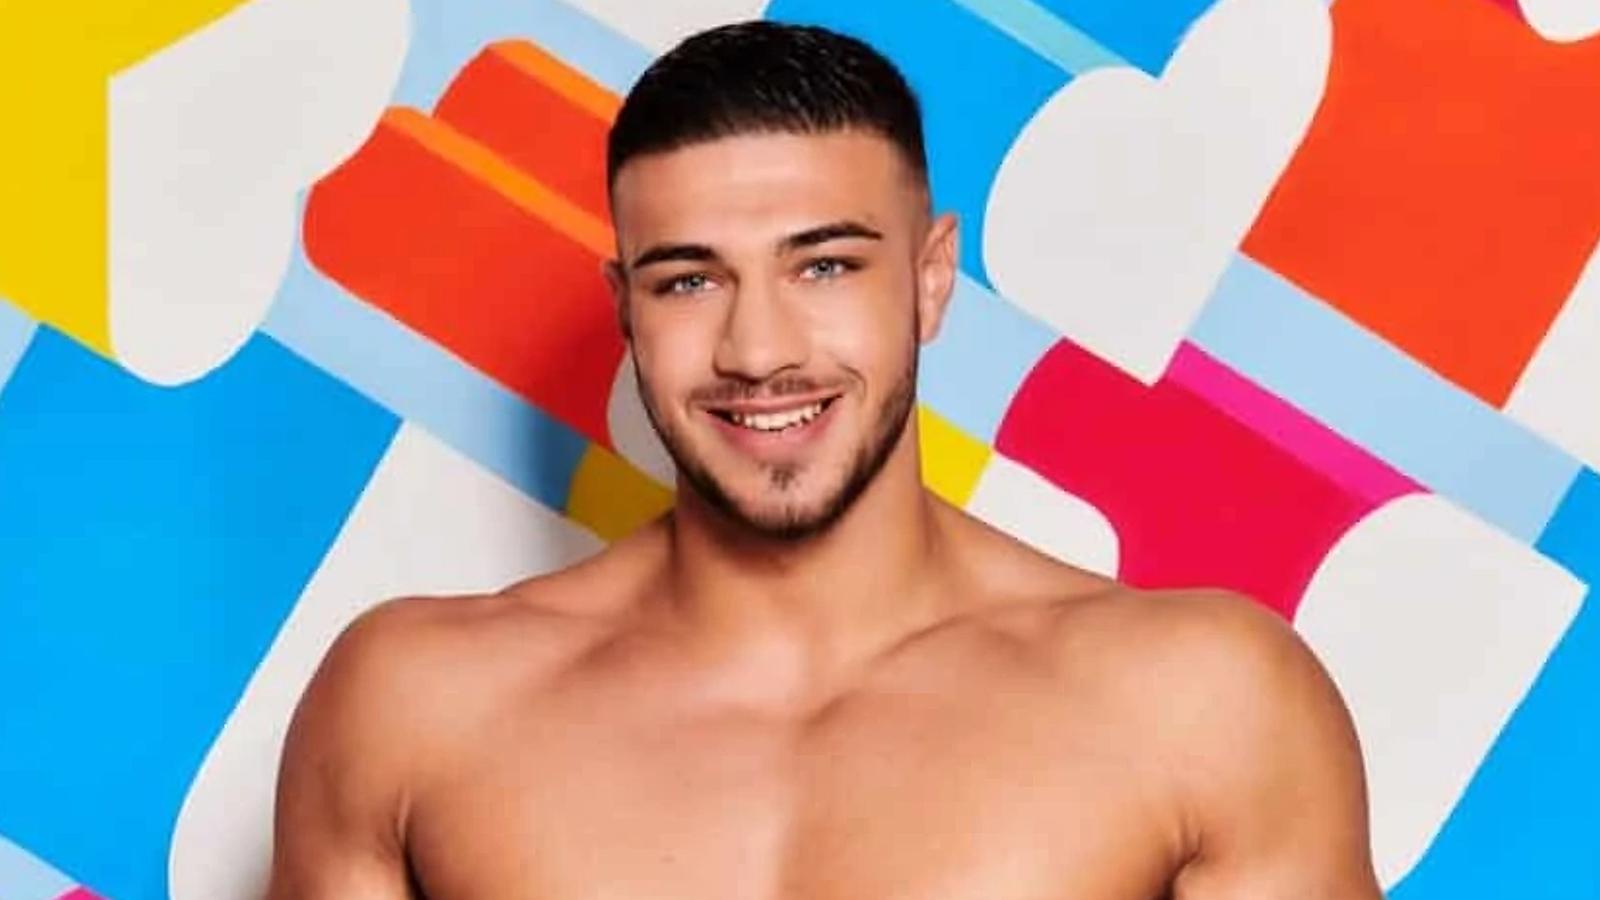 Tommy Fury in Love Island promo image